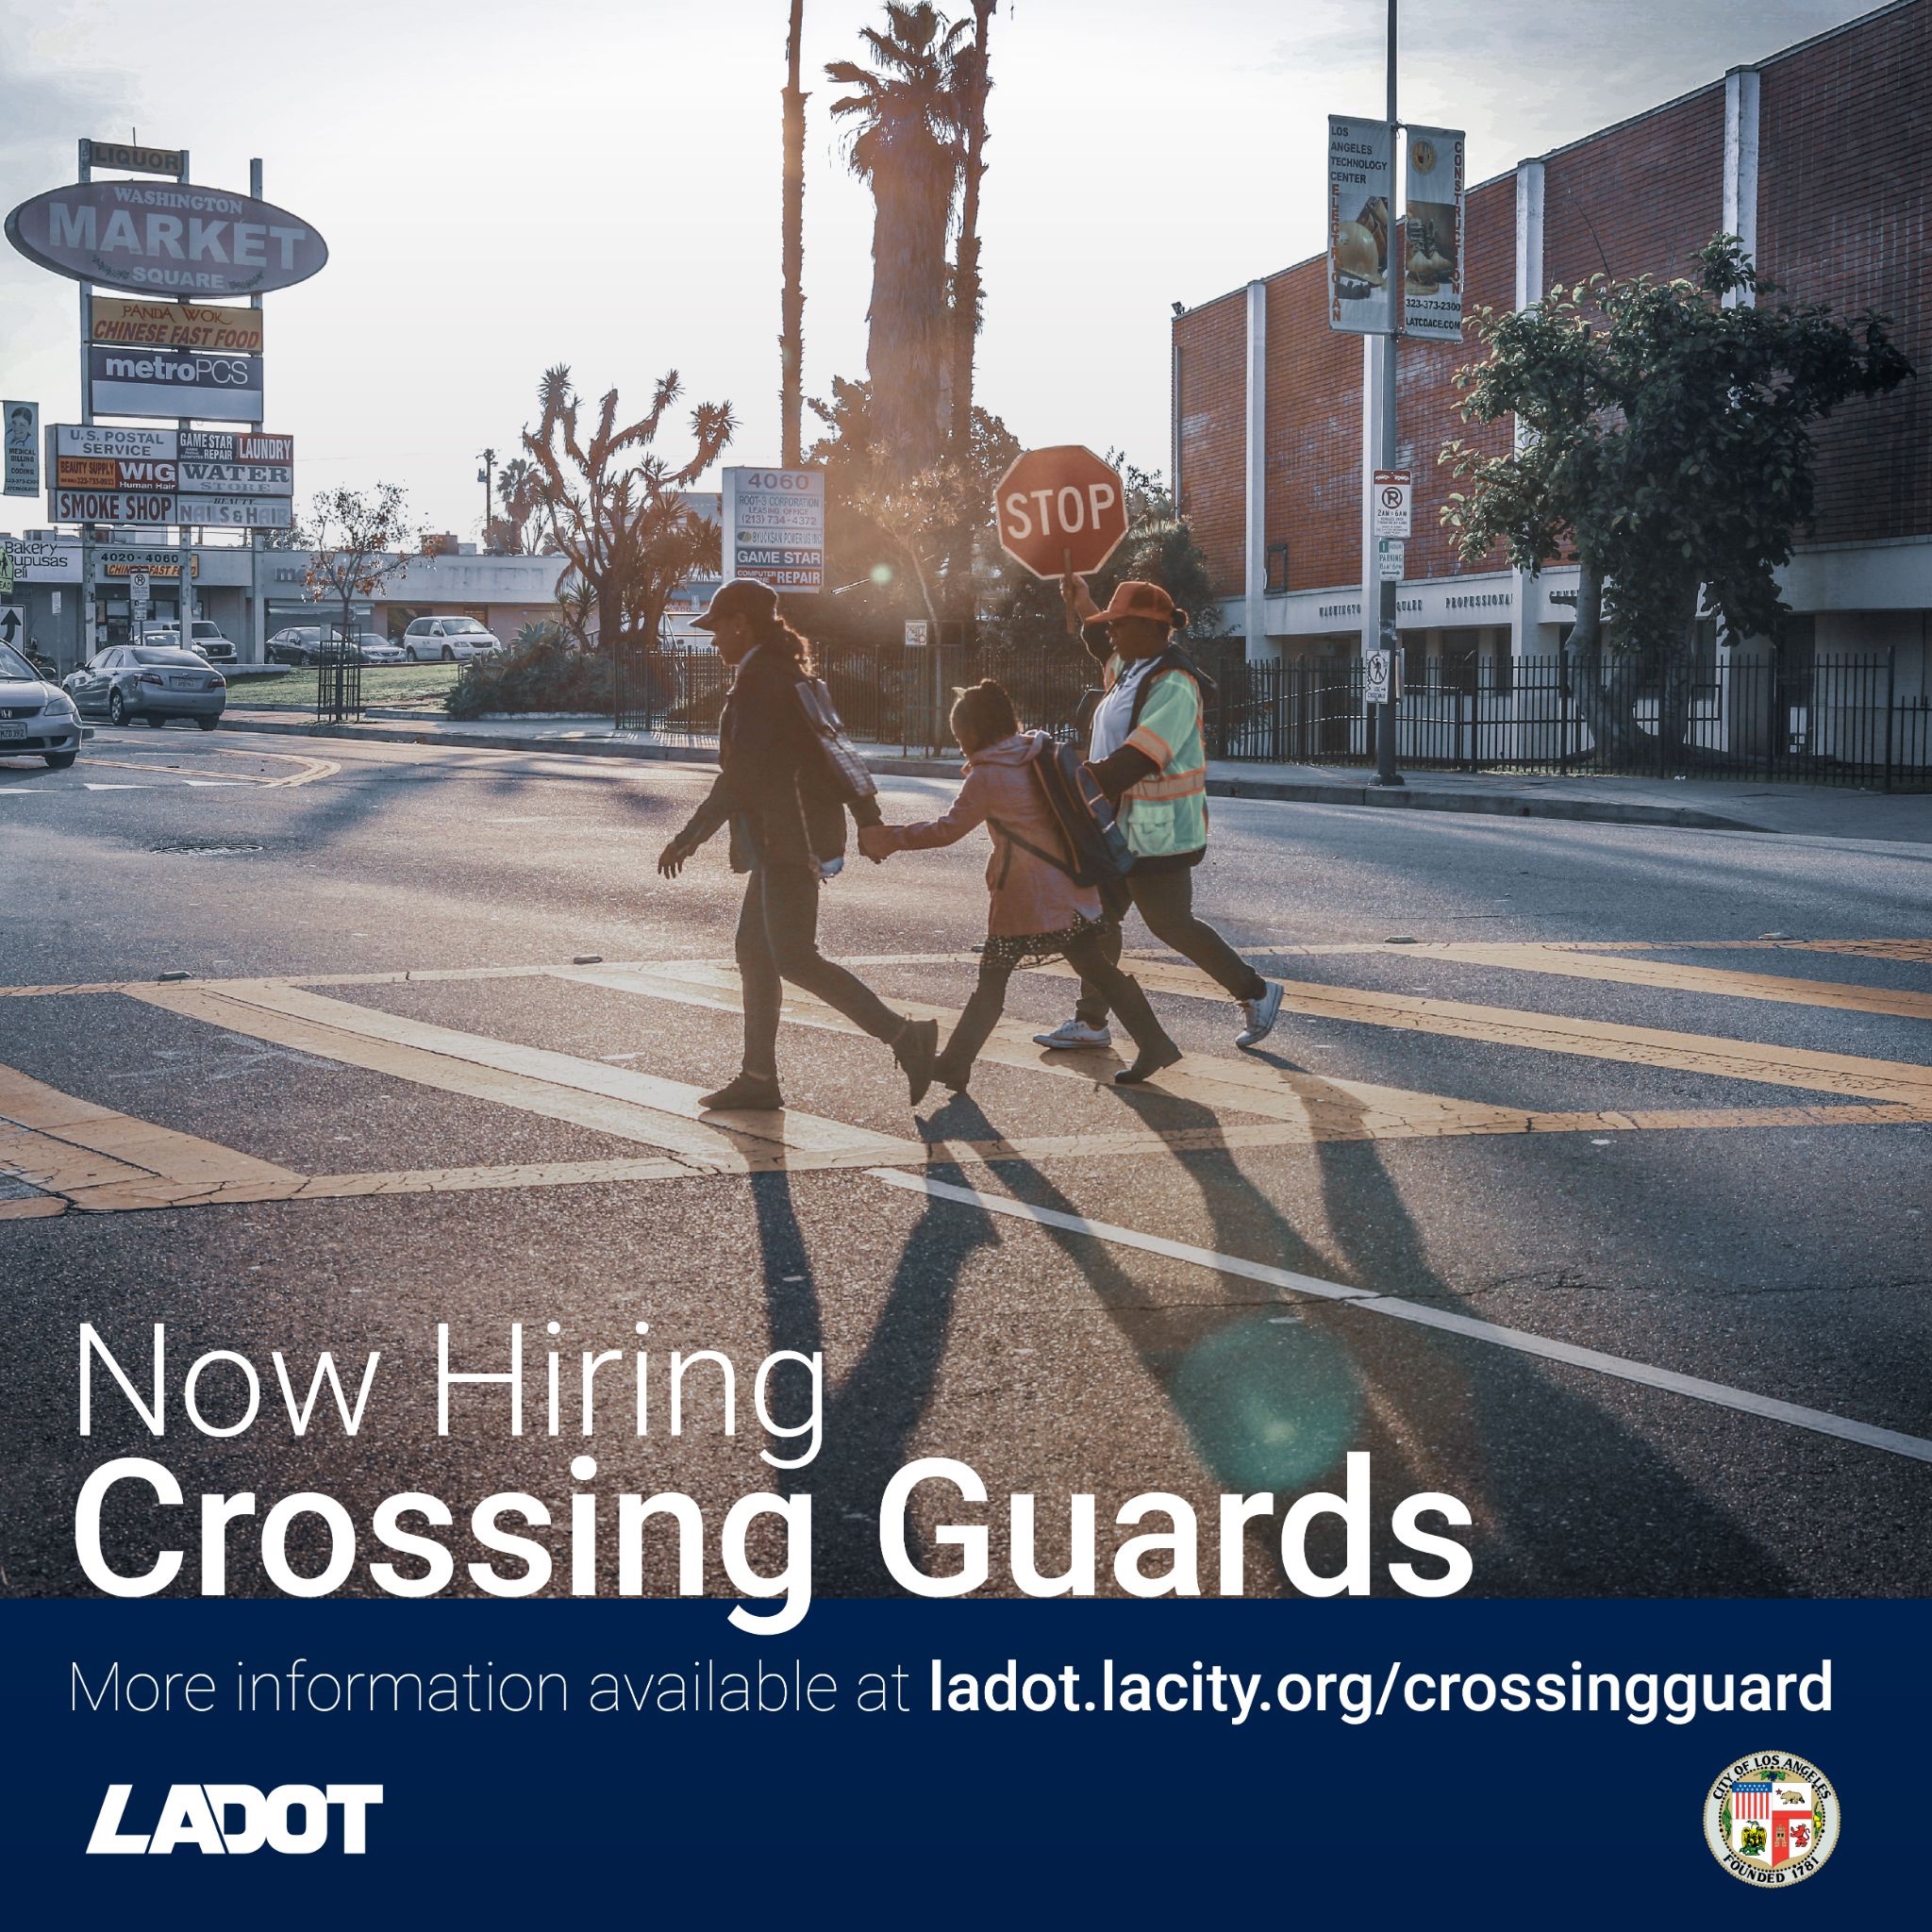 The Los Angeles Department of Transportation is hiring Crossing Guards